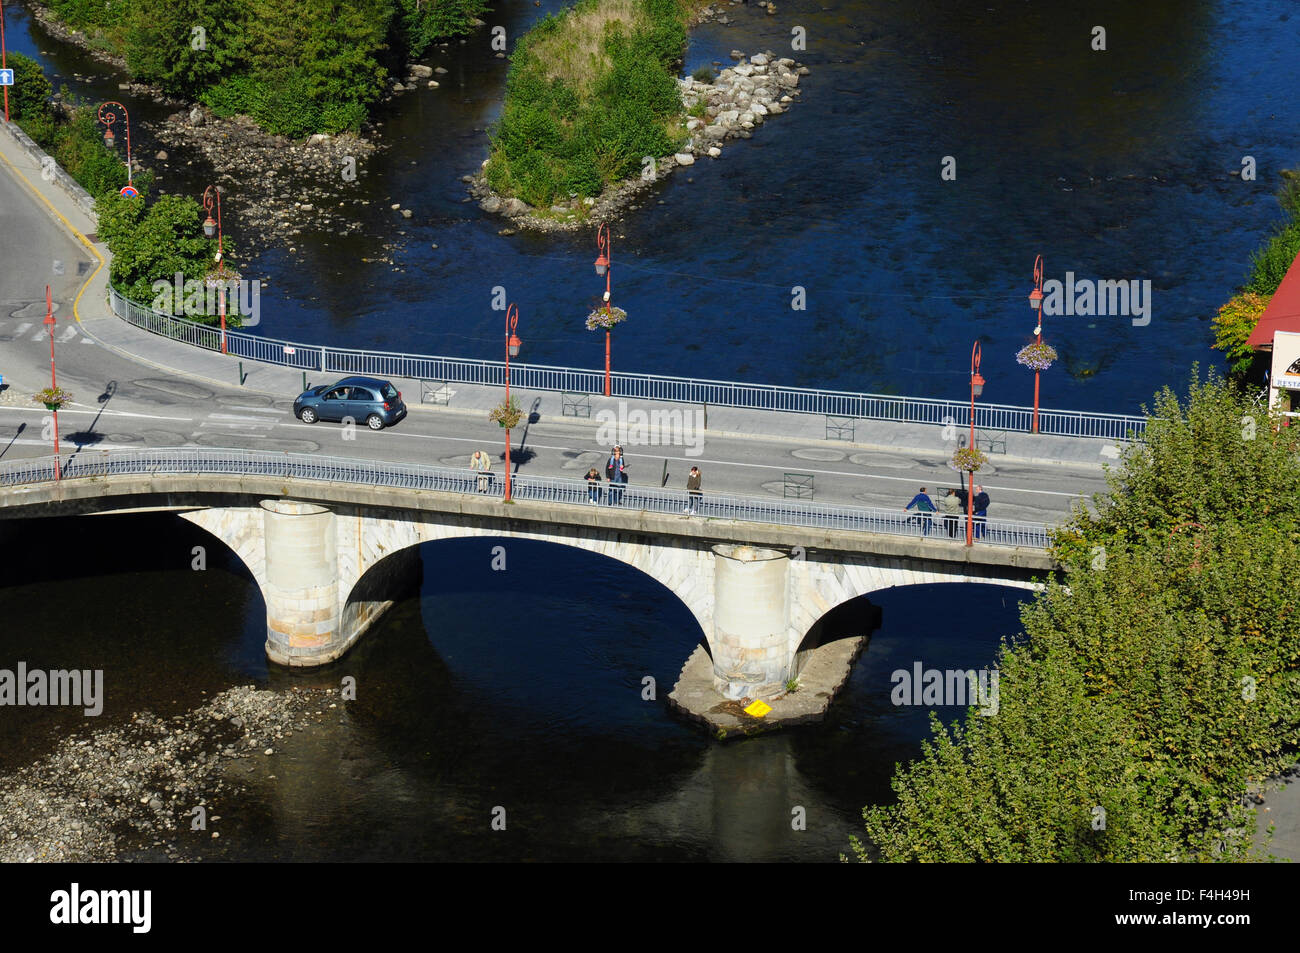 Road bridge over the River Ariege in the town of Tarascon, Ariege, Midi-Pyrenees, France Stock Photo